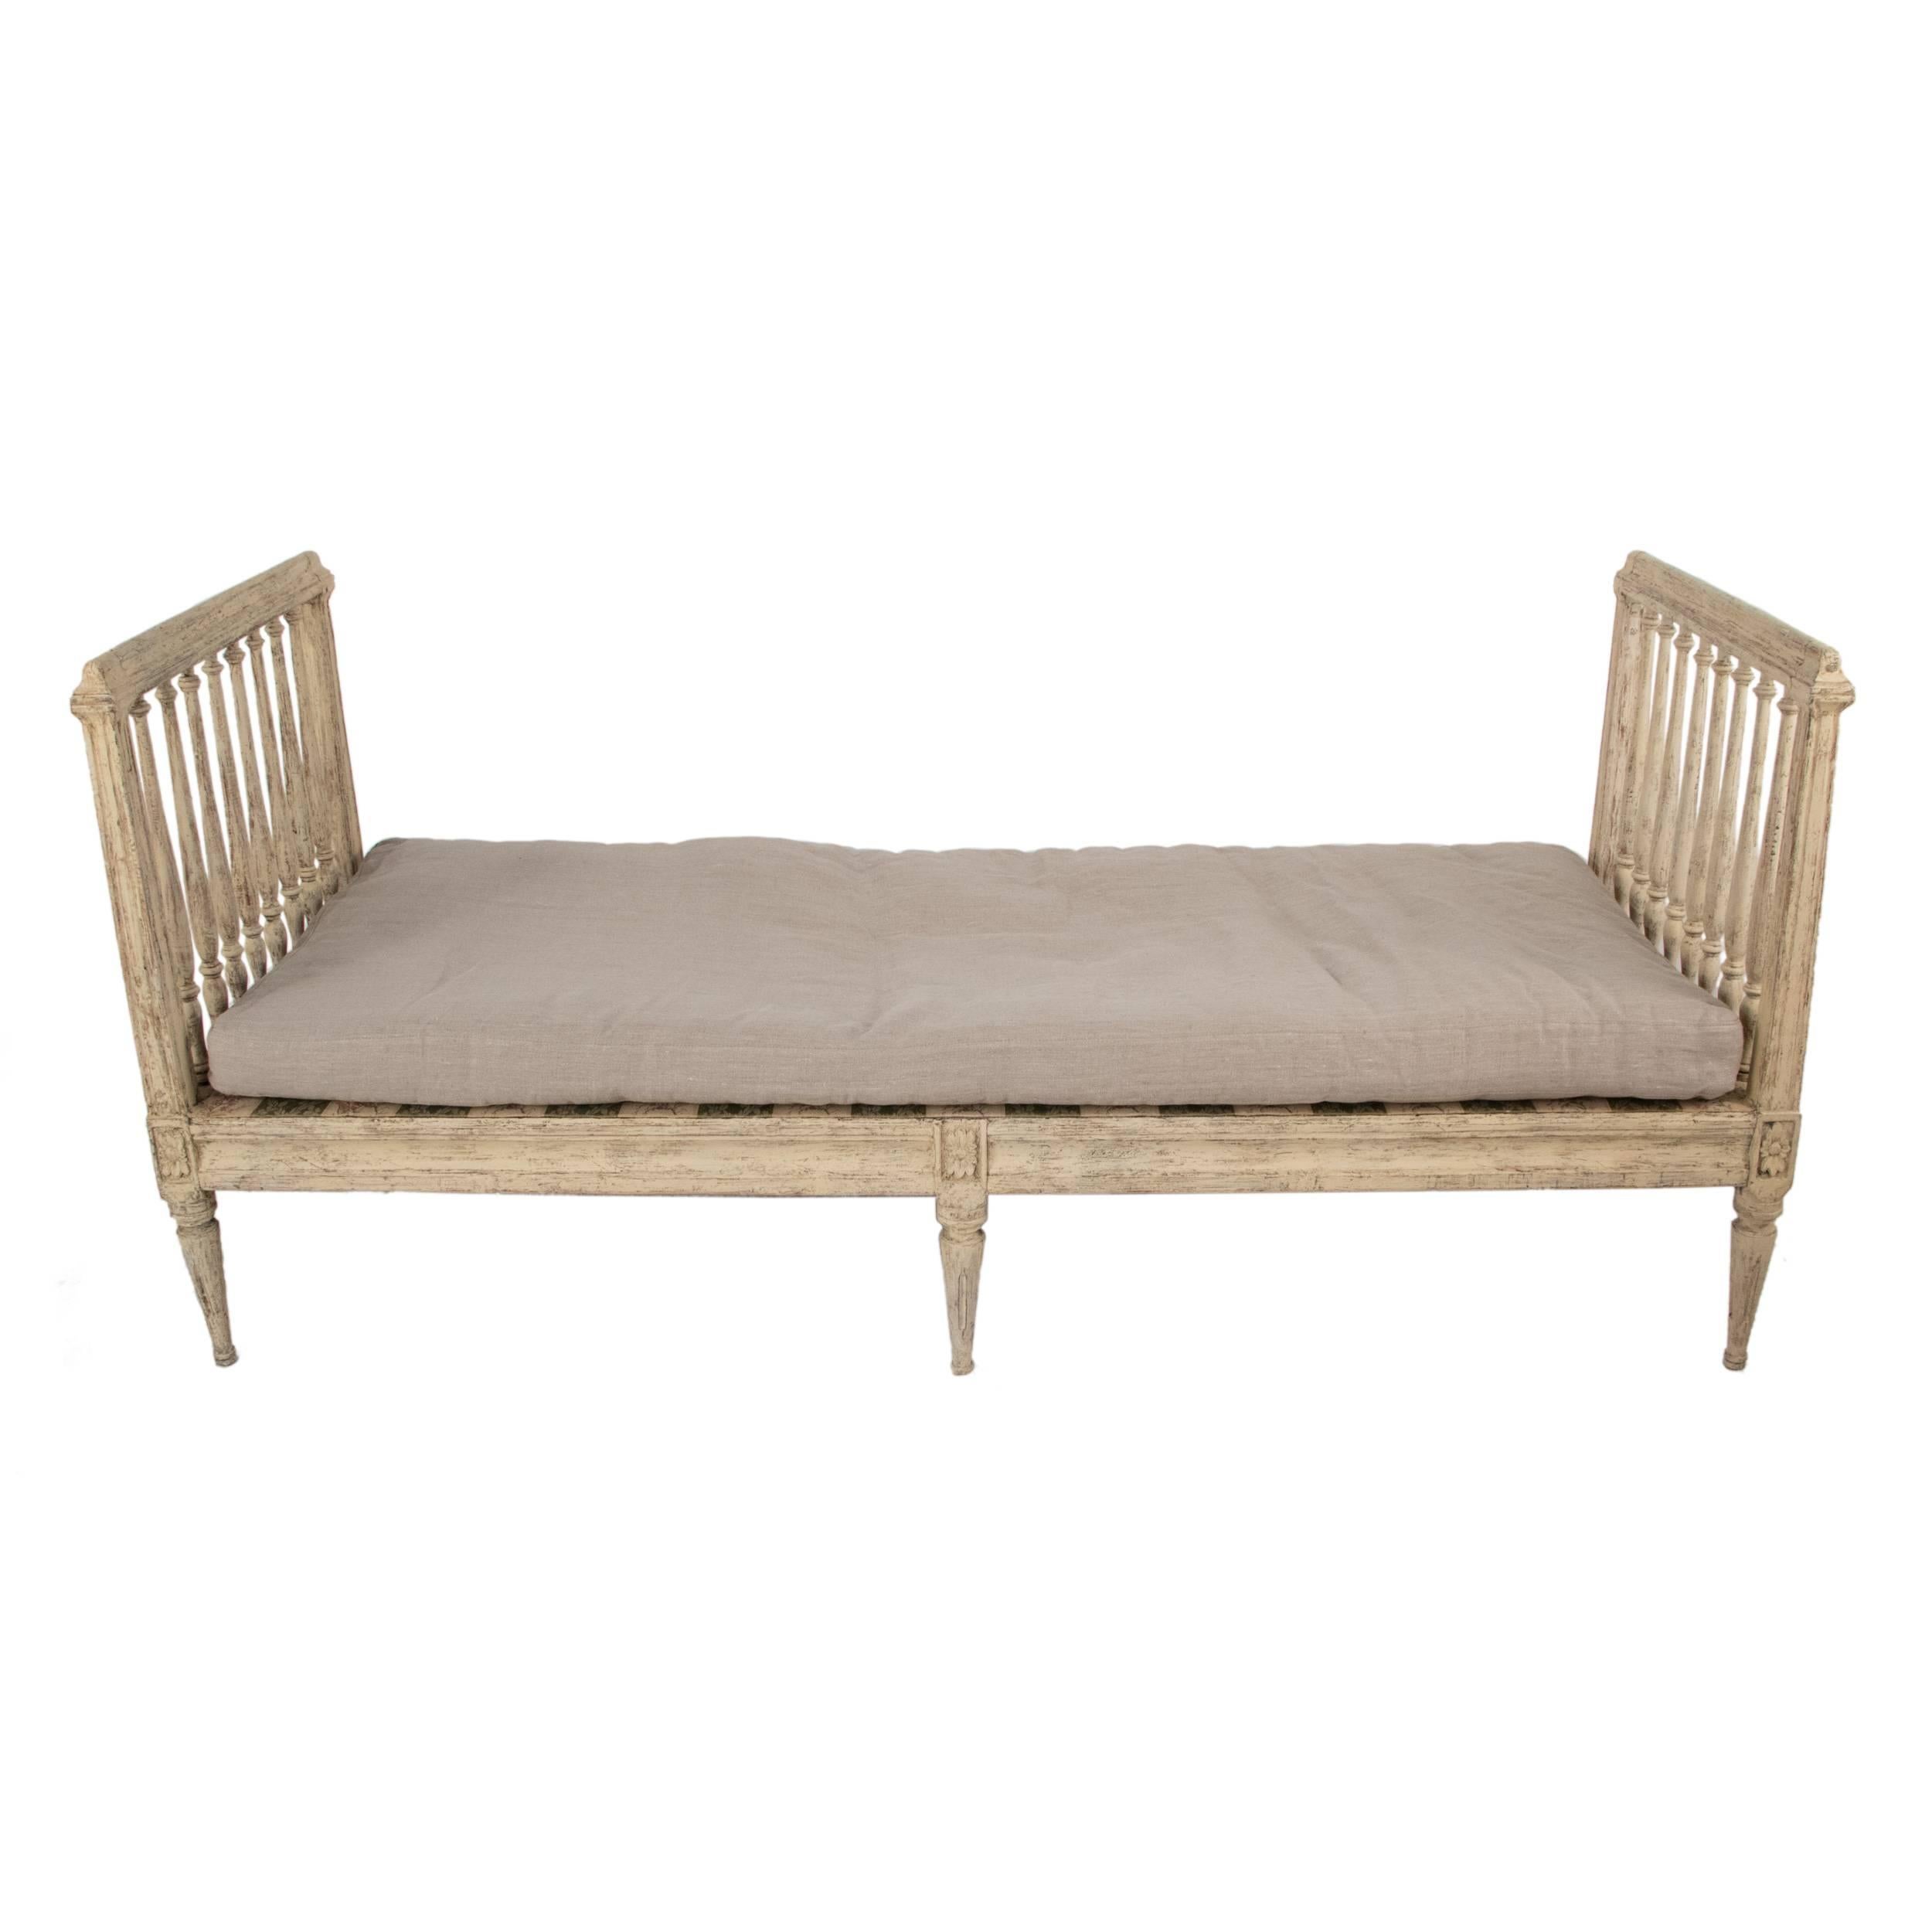 Gustation daybed in a worn pale grey patina.